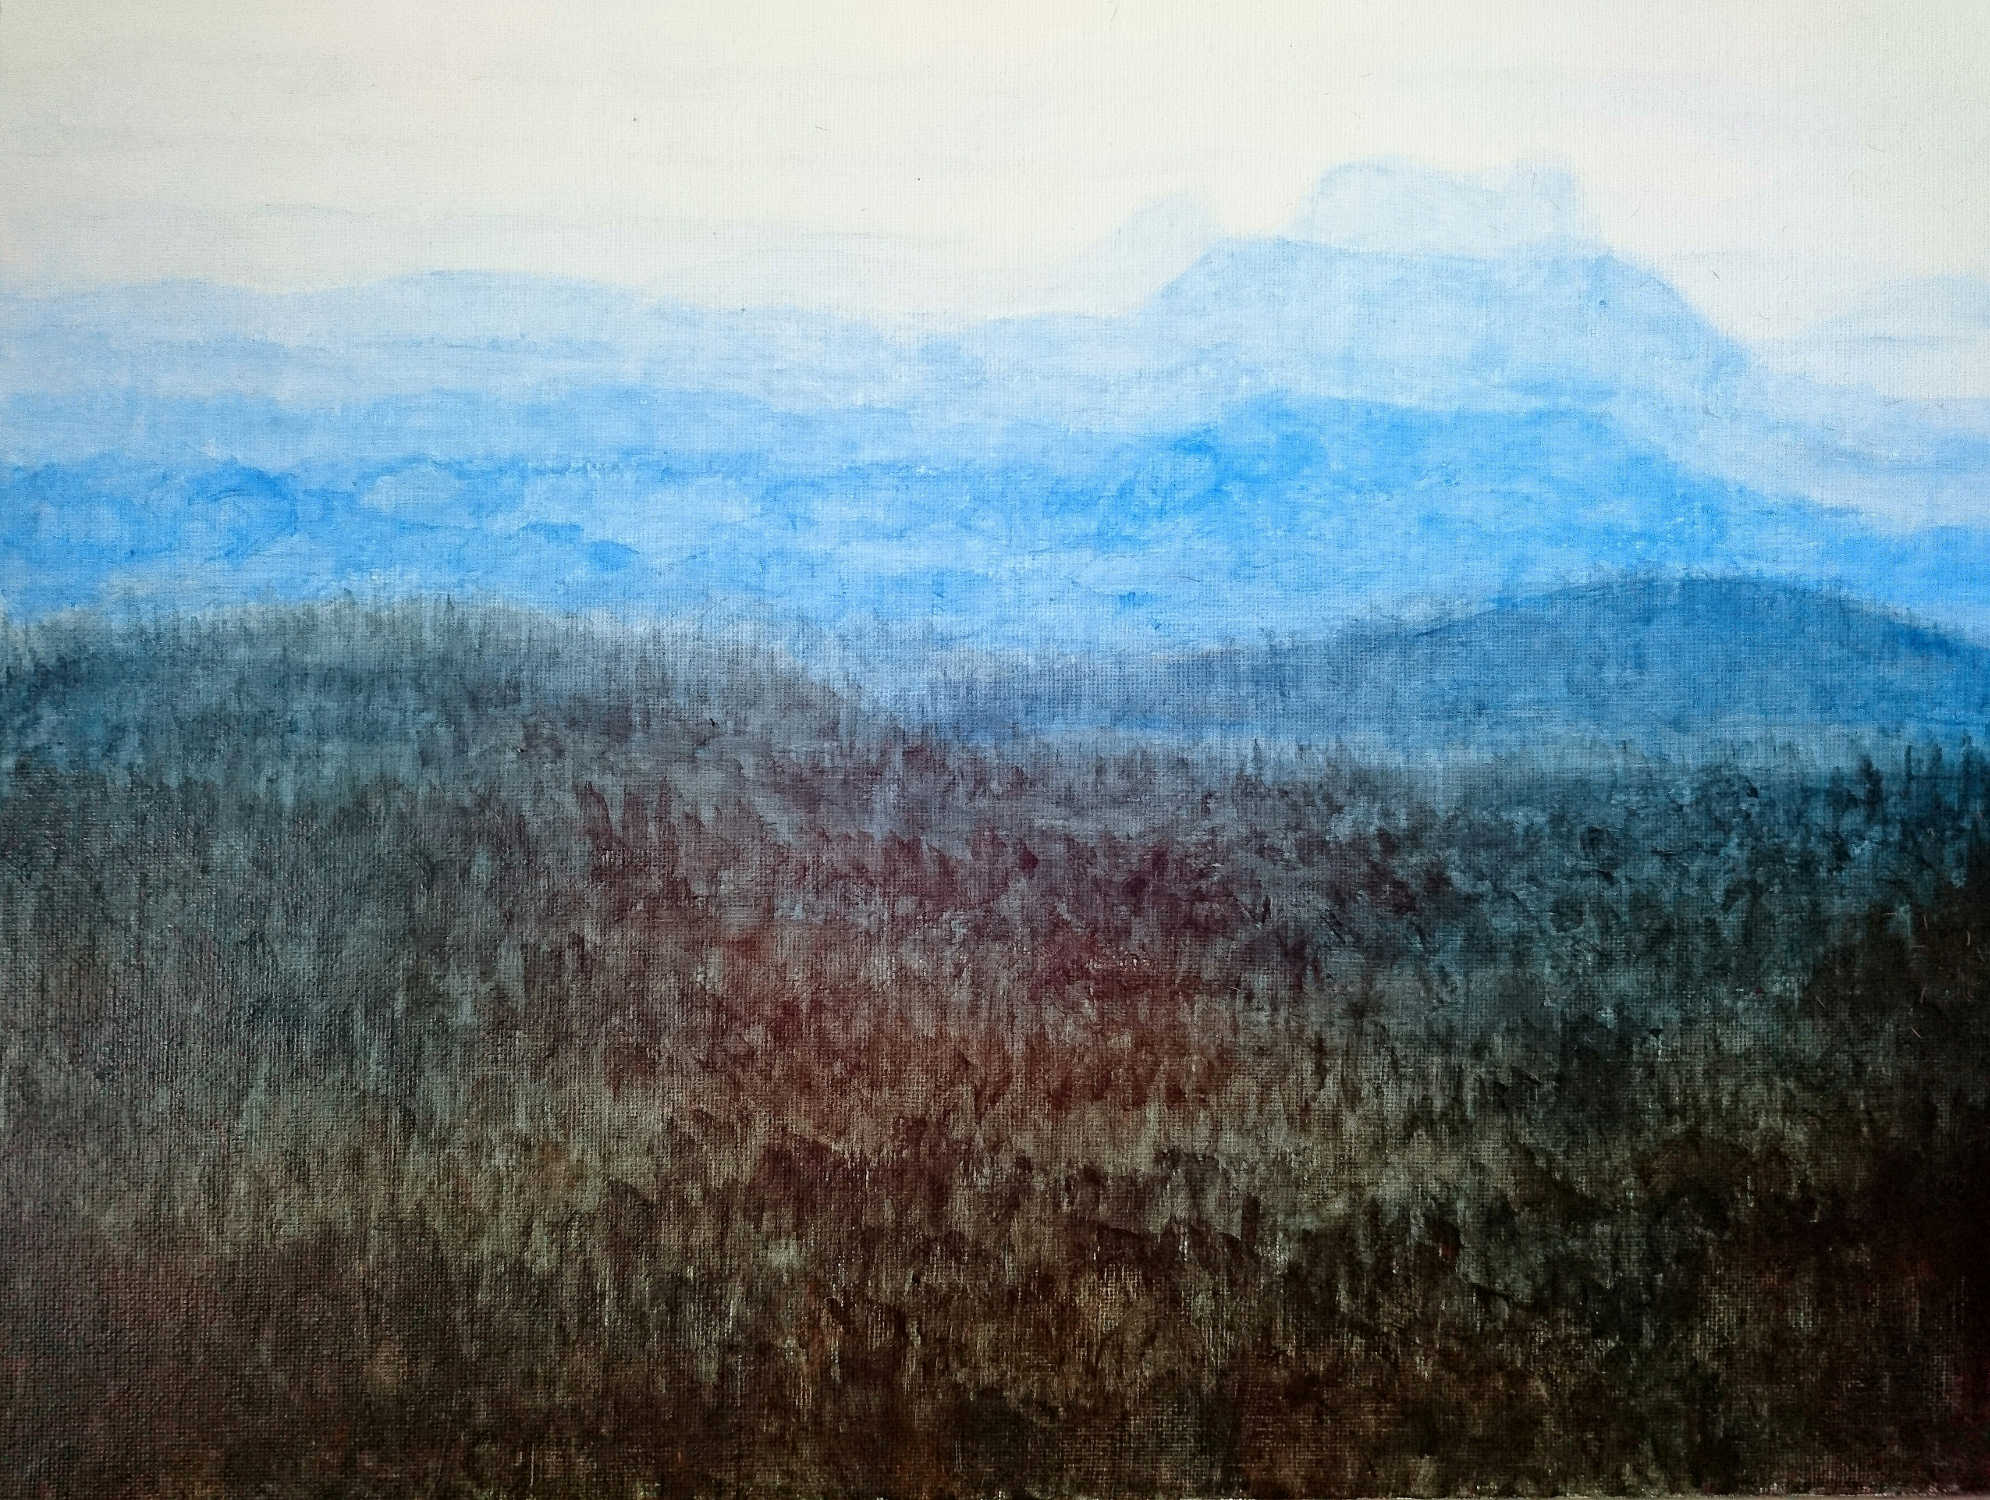 A painting of juxtaposing mountains